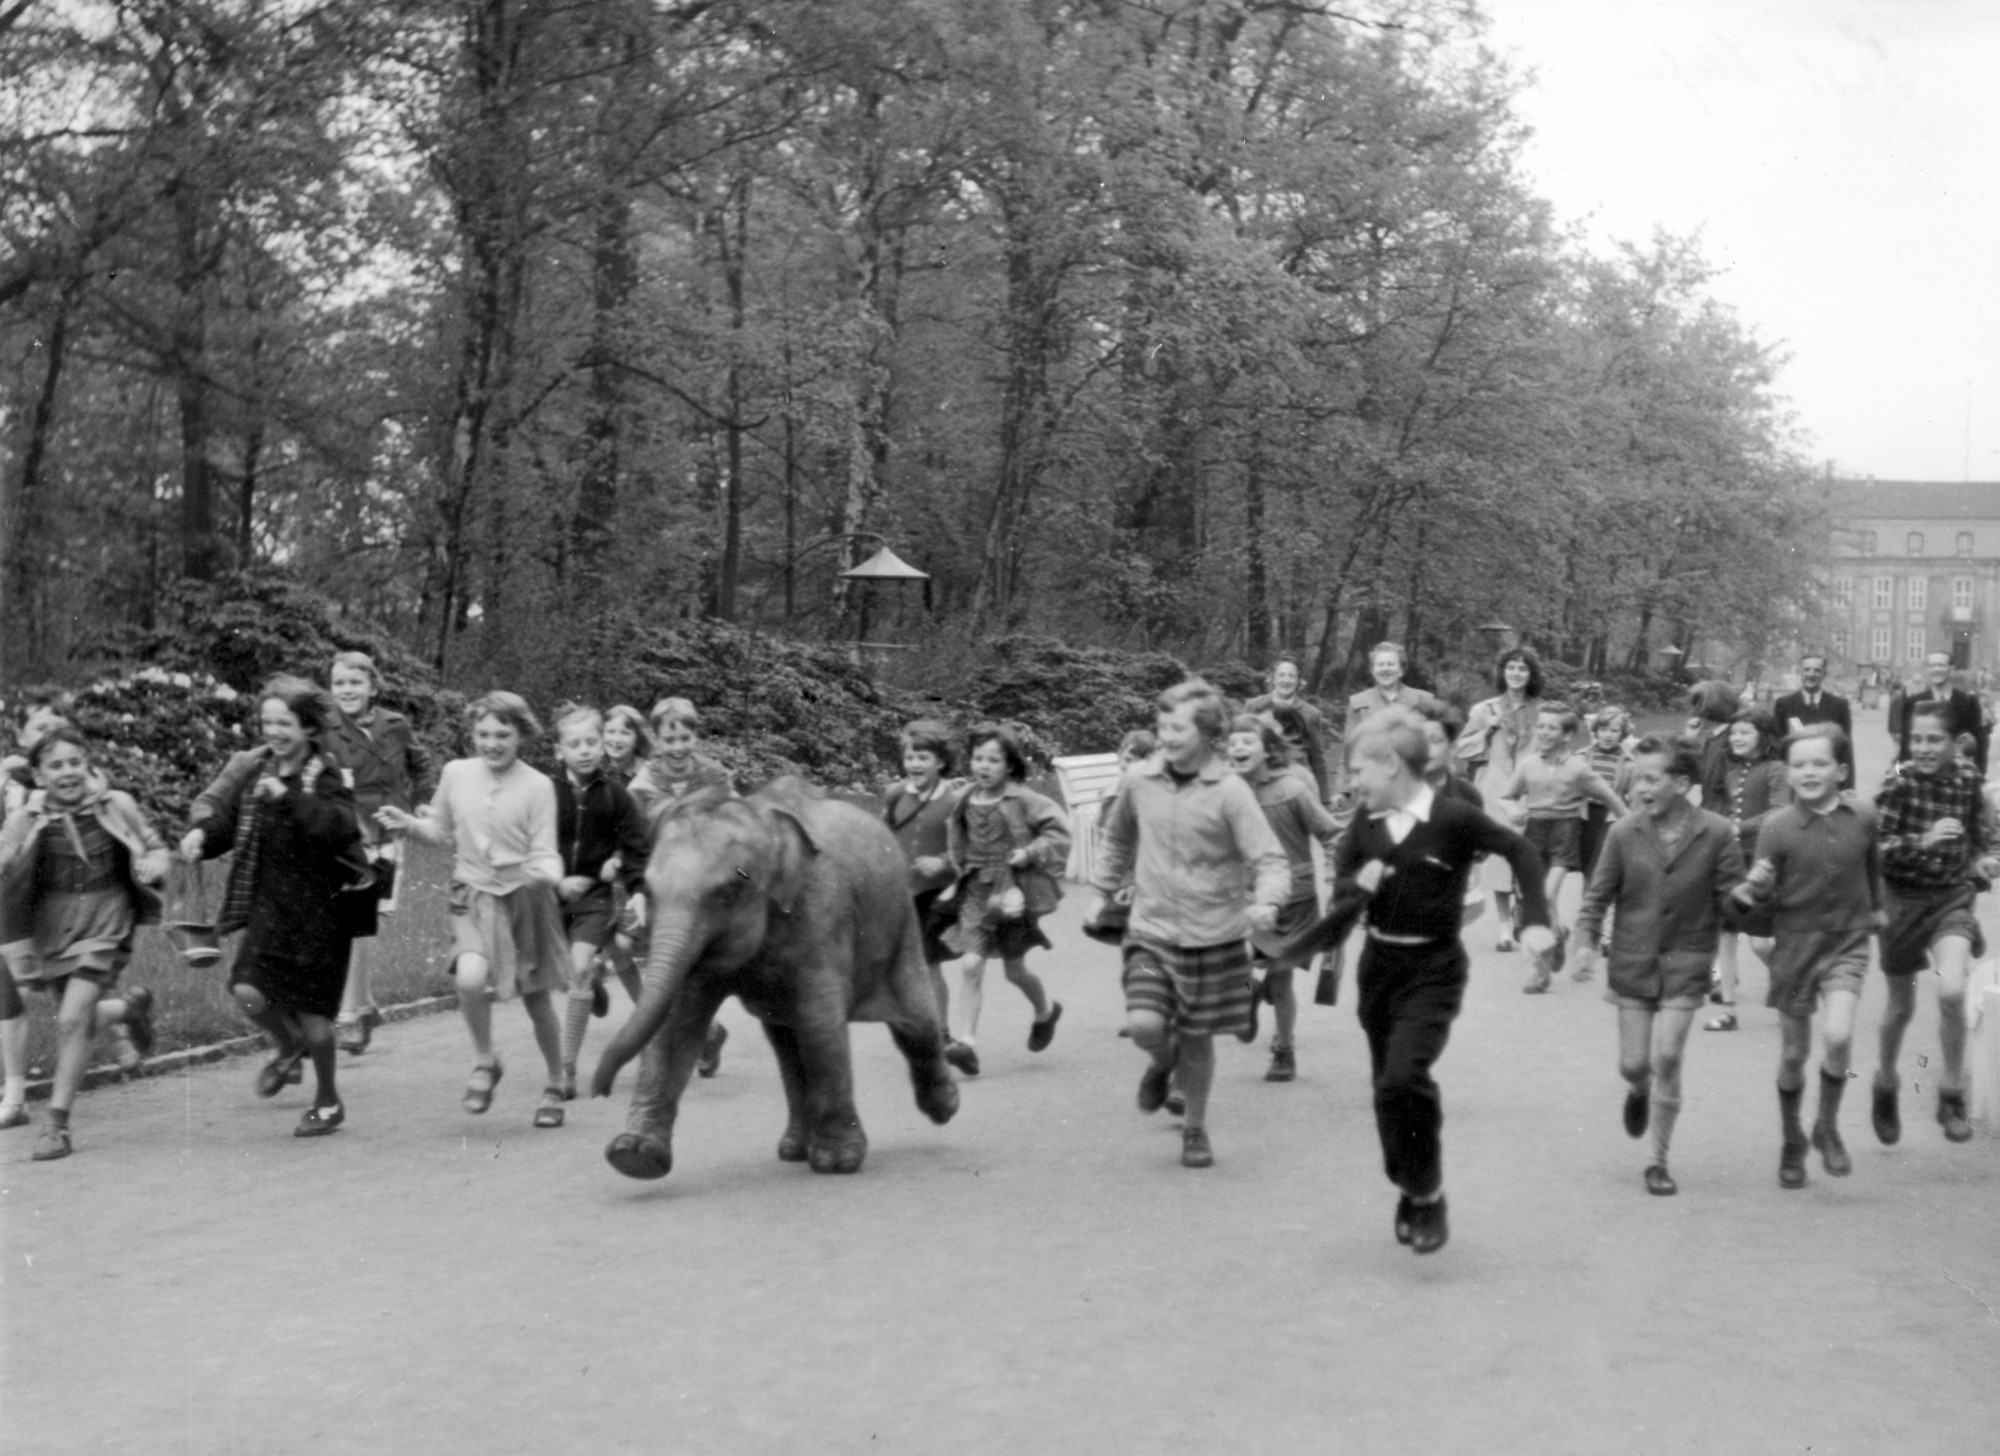 Black and white photograph: Elephant calf running along a wide road flanked by trees, accompanied by at least 20 children.